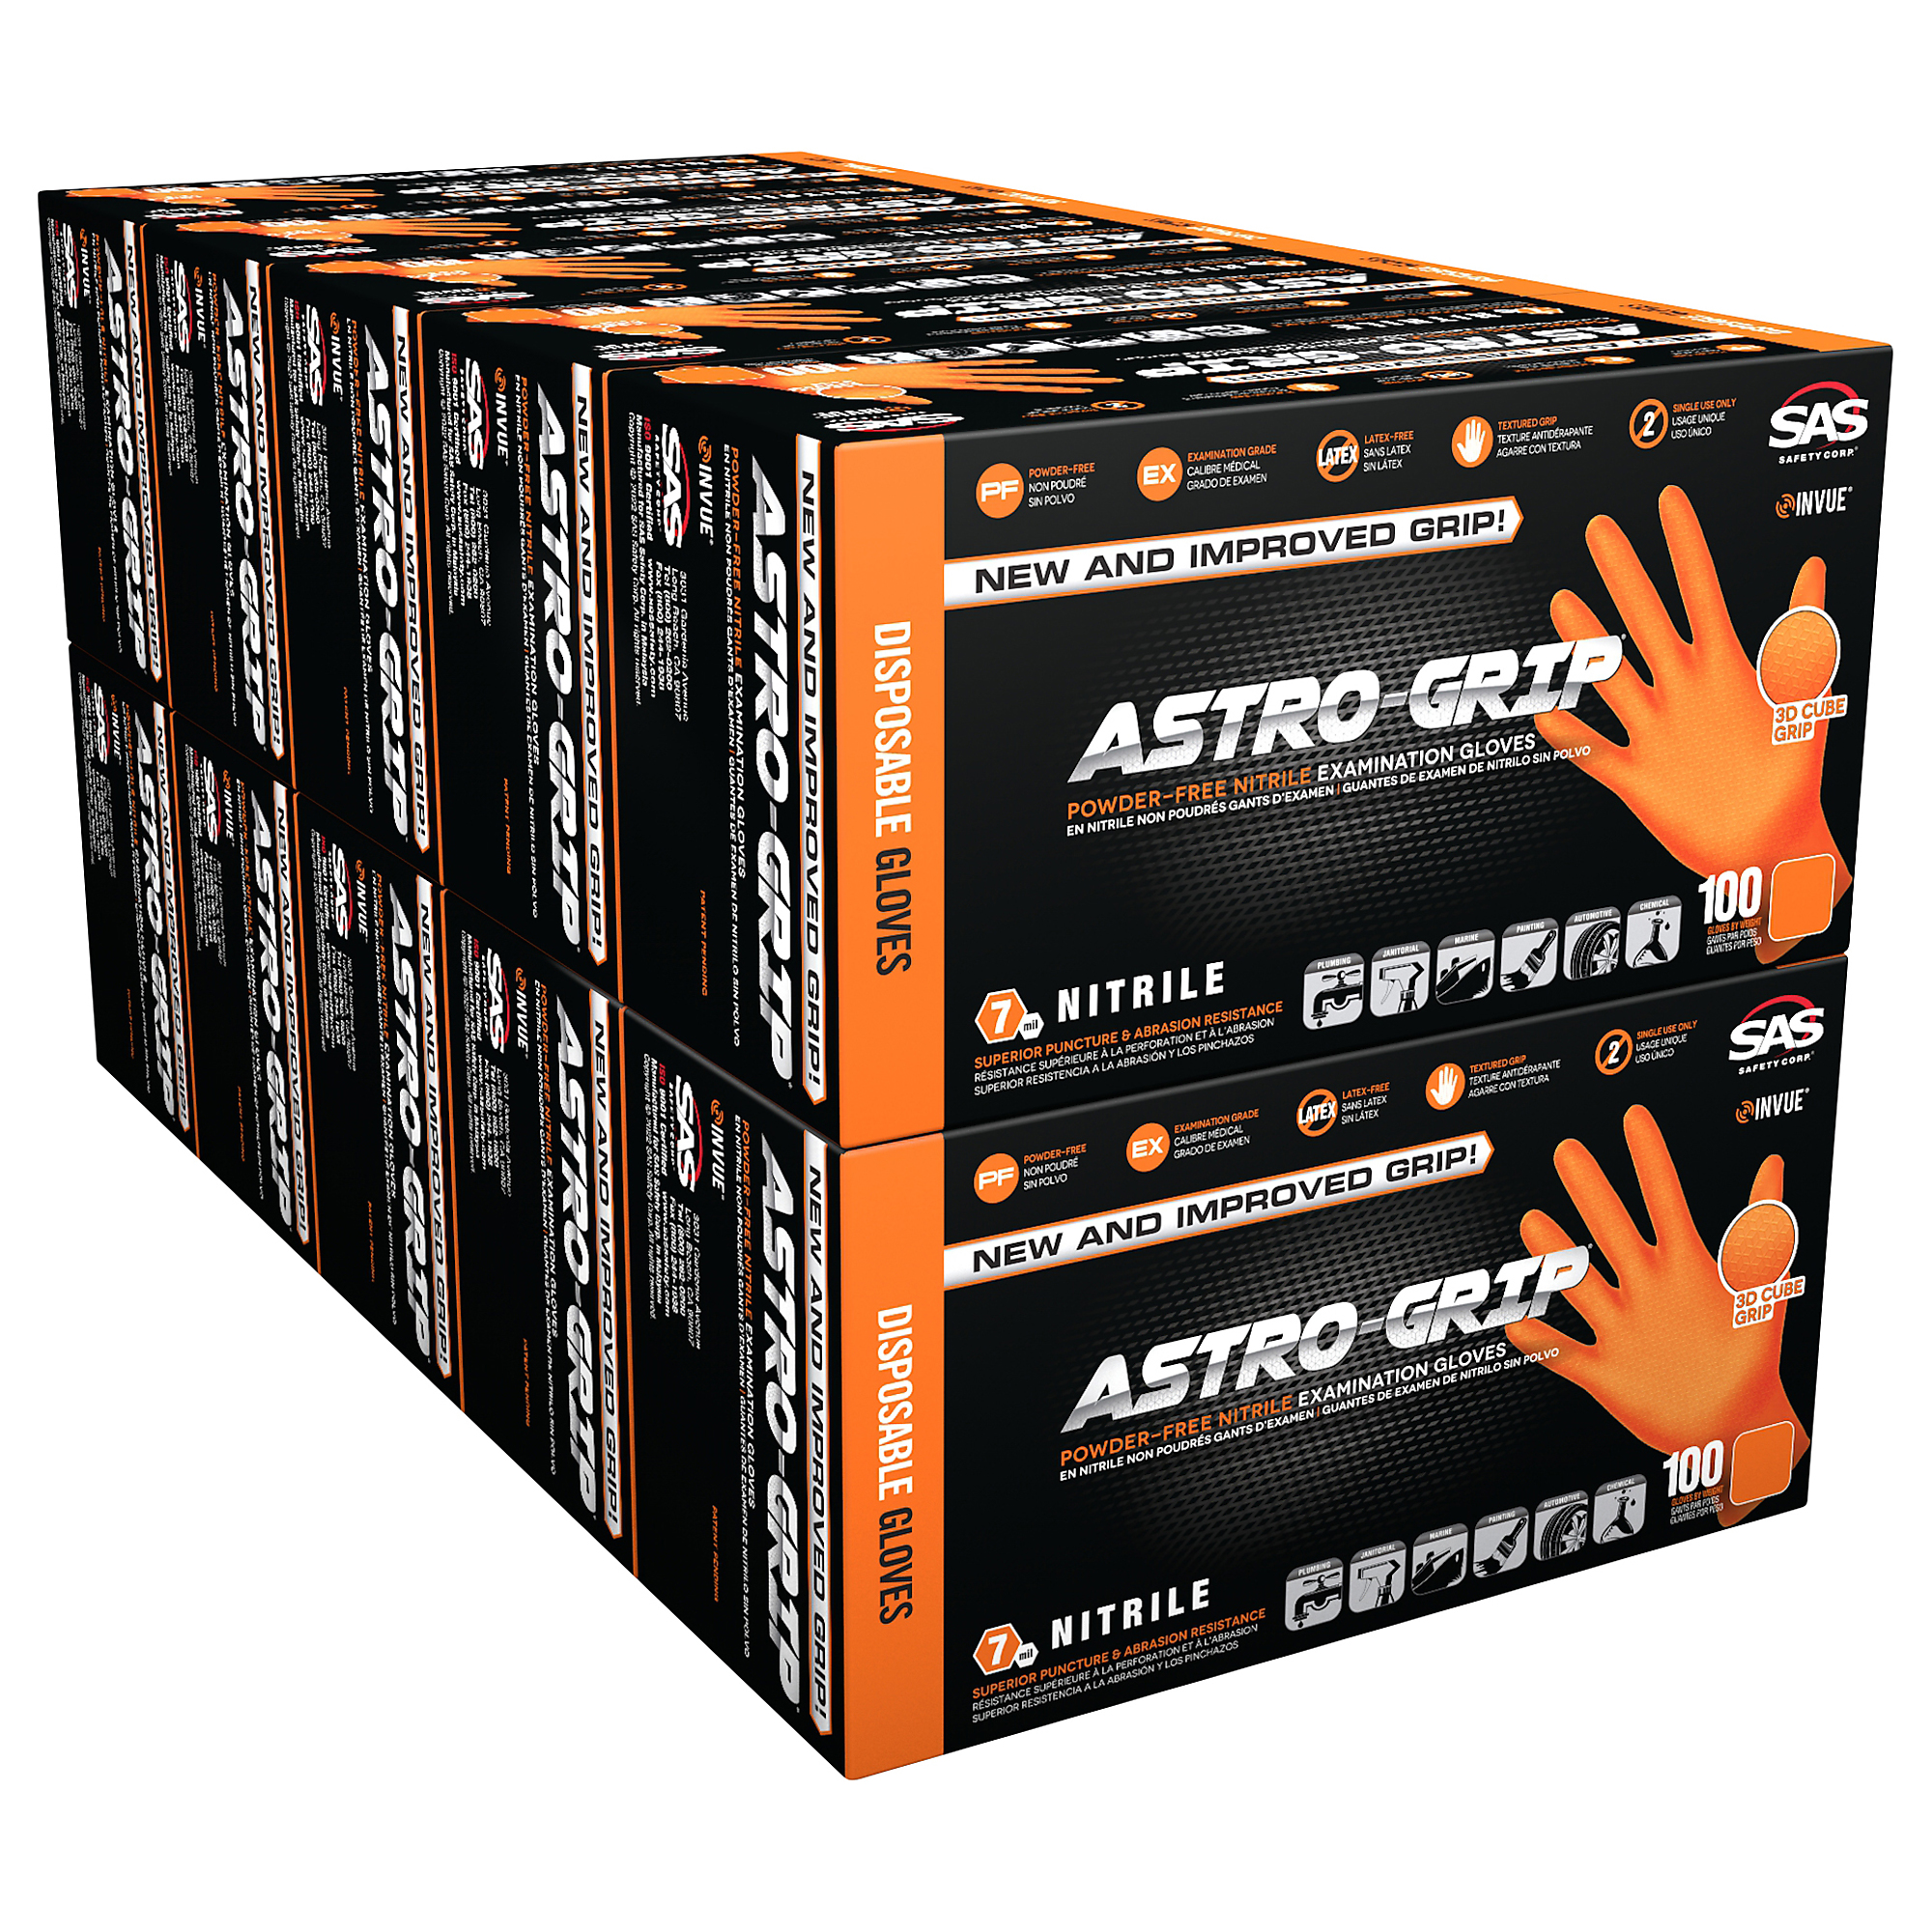 AstroGrip, 1000 Astro-Grip Disposable Gloves PF Nitrile 7mil, Size 2XL, Color Orange, Included (qty.) 1000 Model 66475CASE